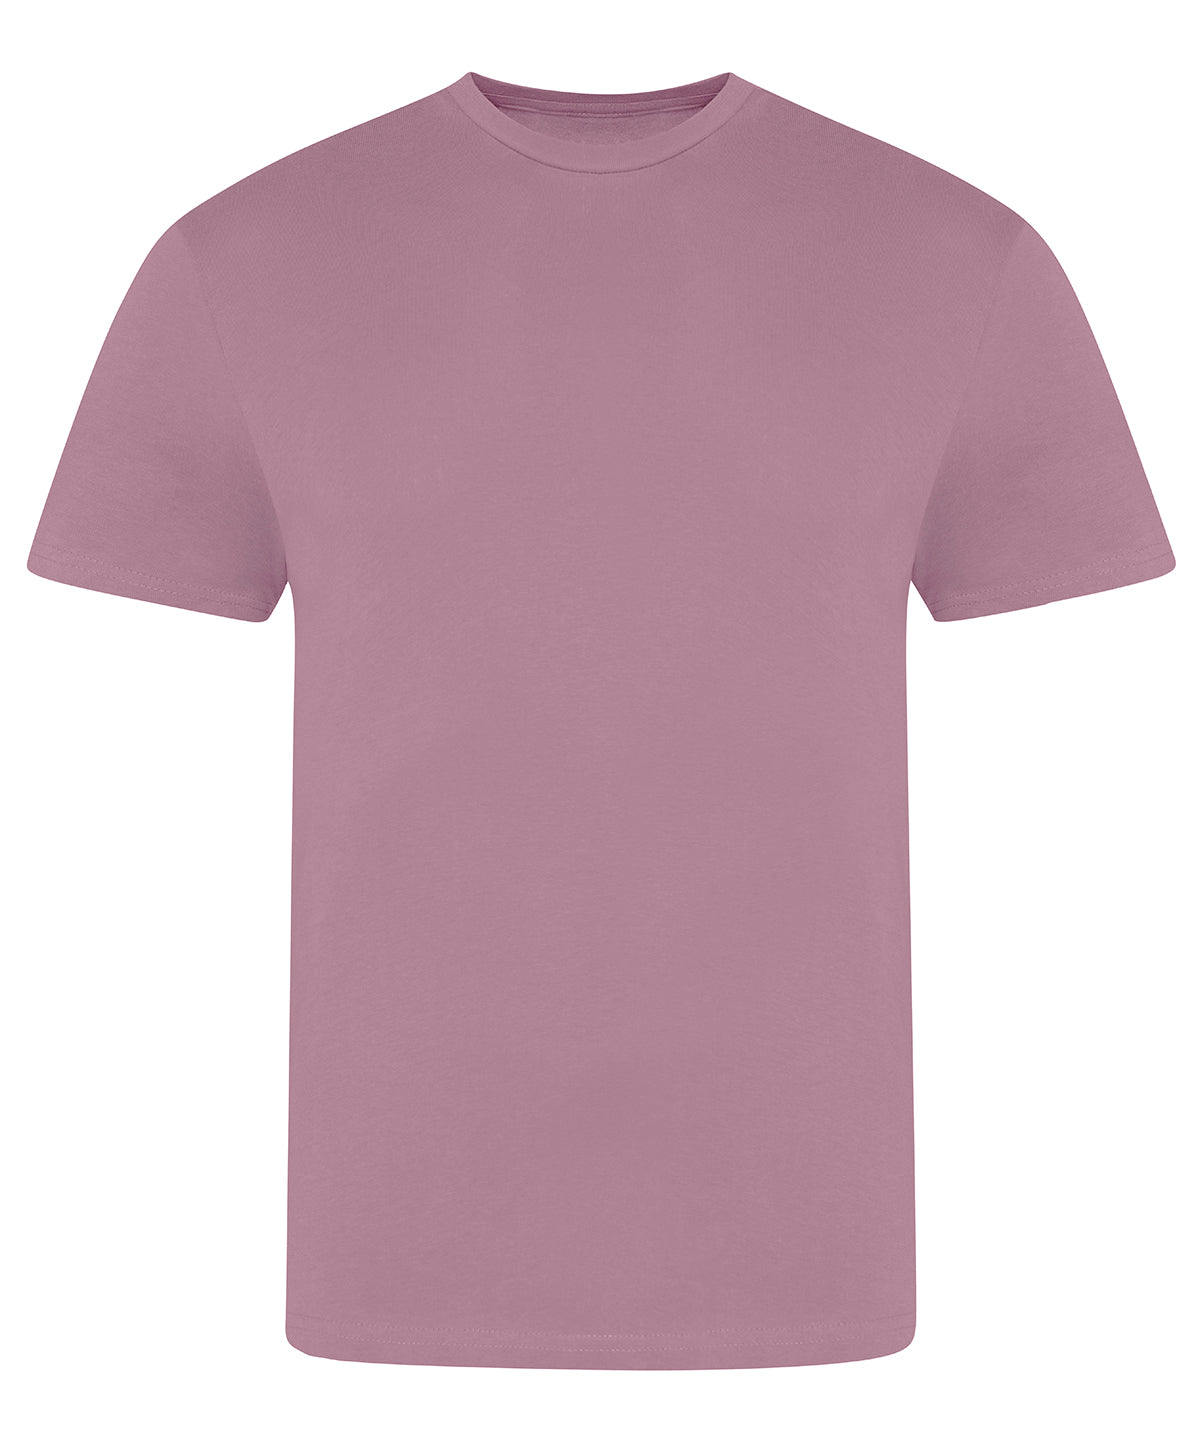 Personalised T-Shirts - Light Pink AWDis Just T's The 100 T